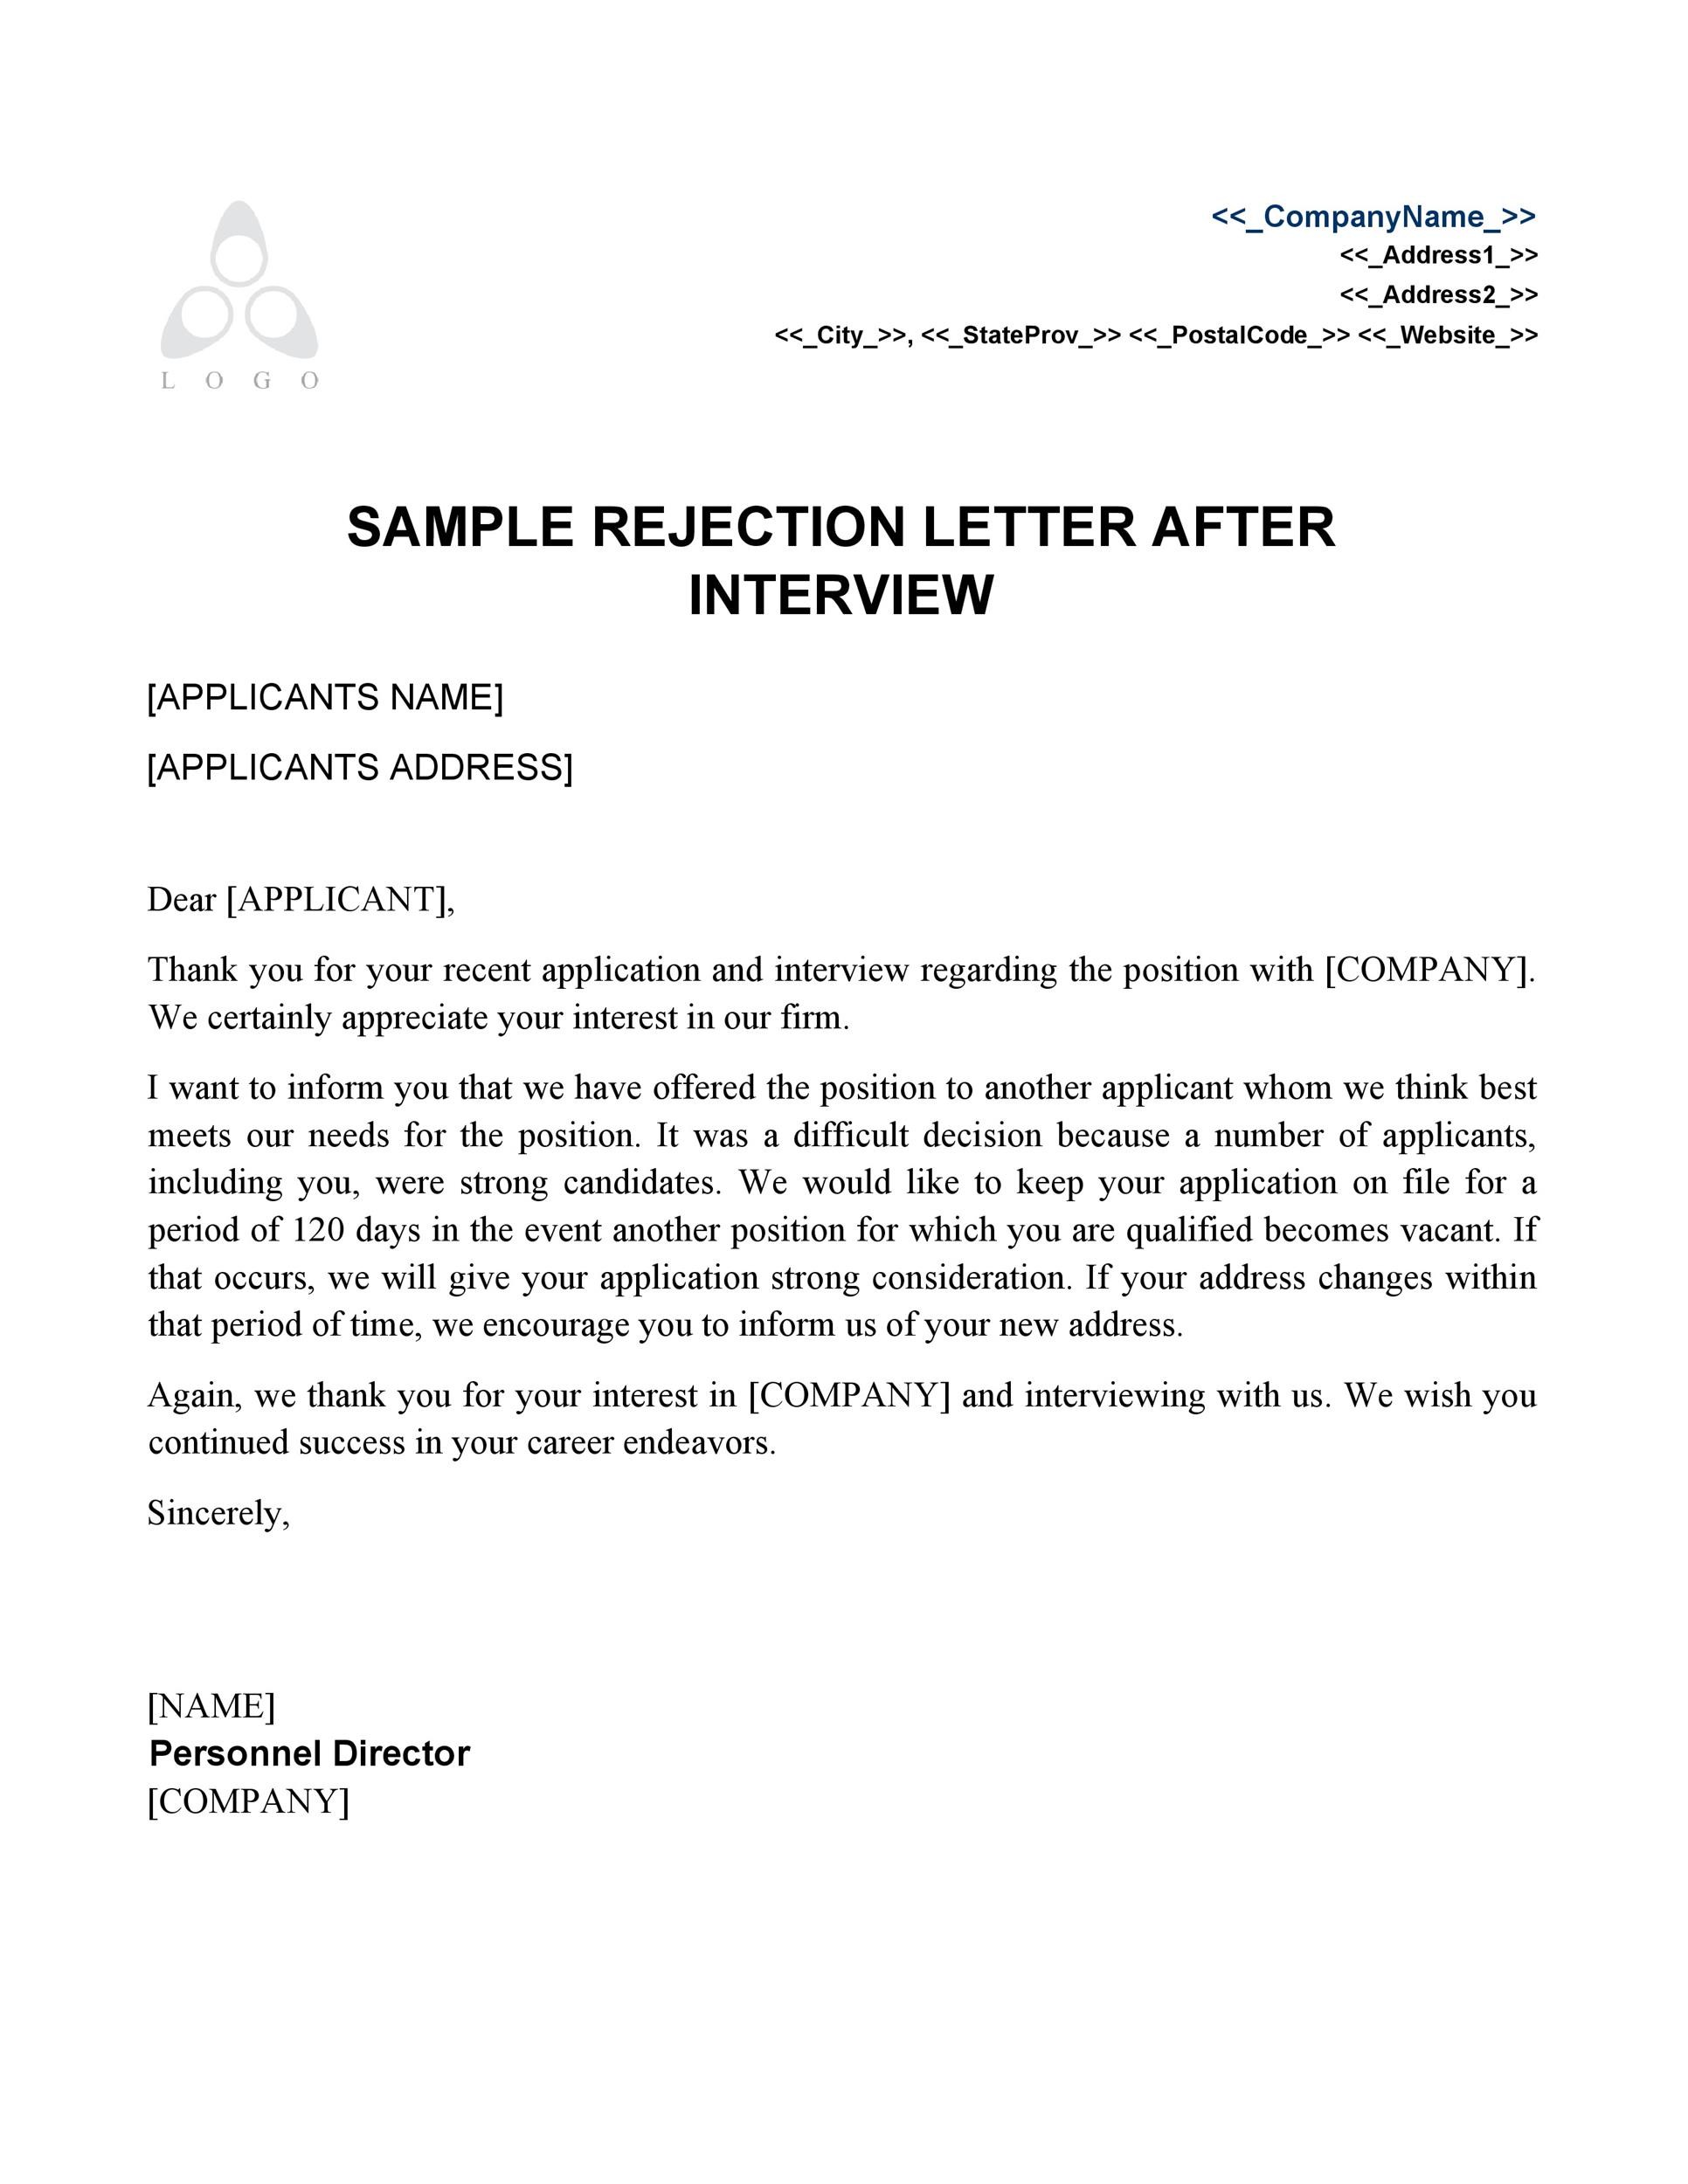 Sample Bad News Letter To Applicant mamiihondenk org